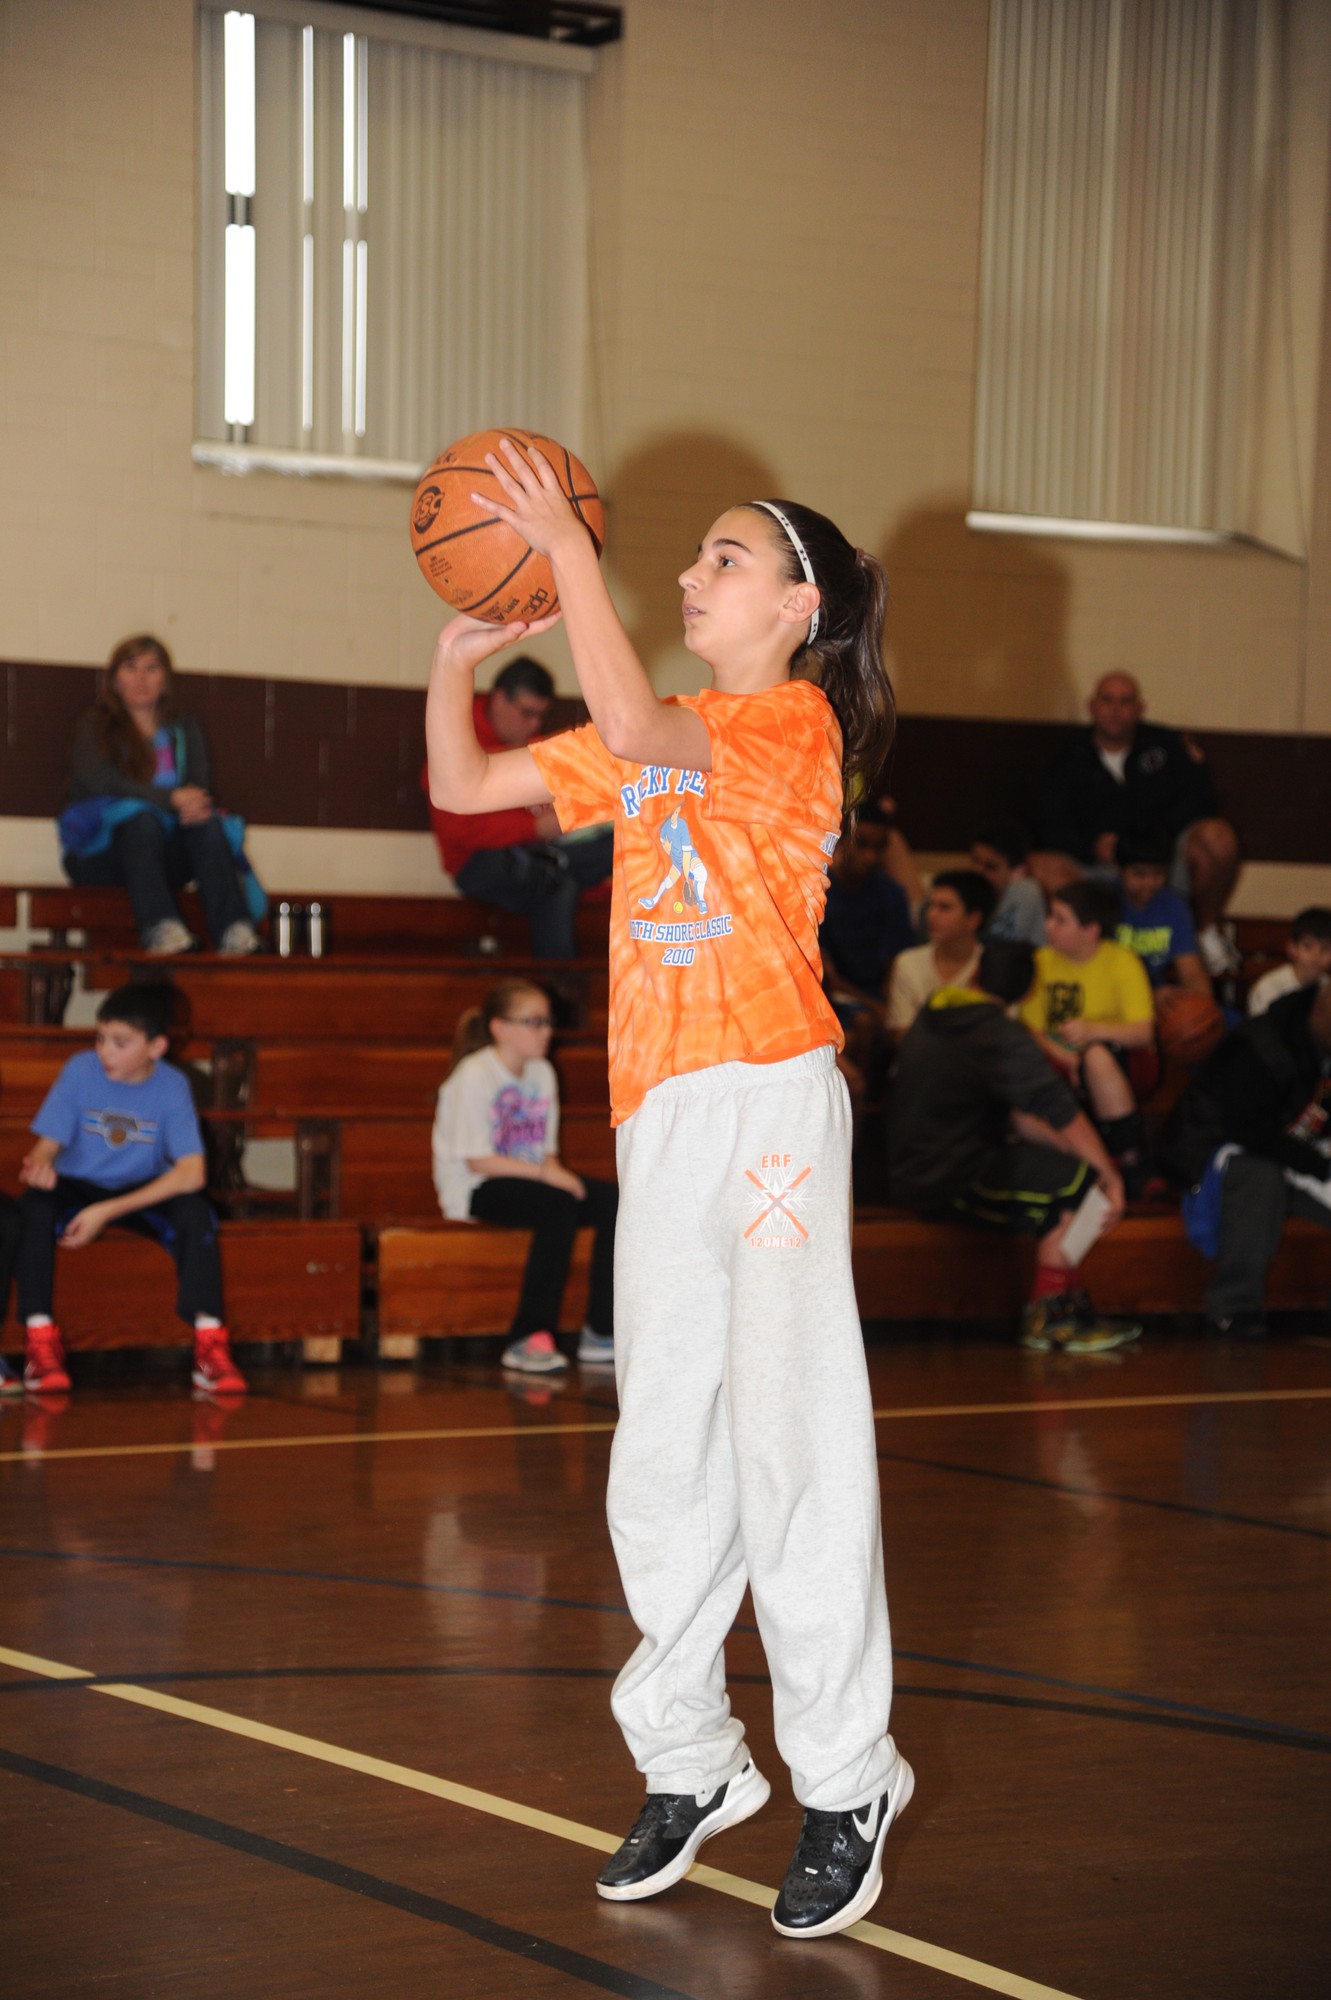 Hannah Arbuse, 13, lined up her shot in the gymnasium of St. Raphael’s parish.